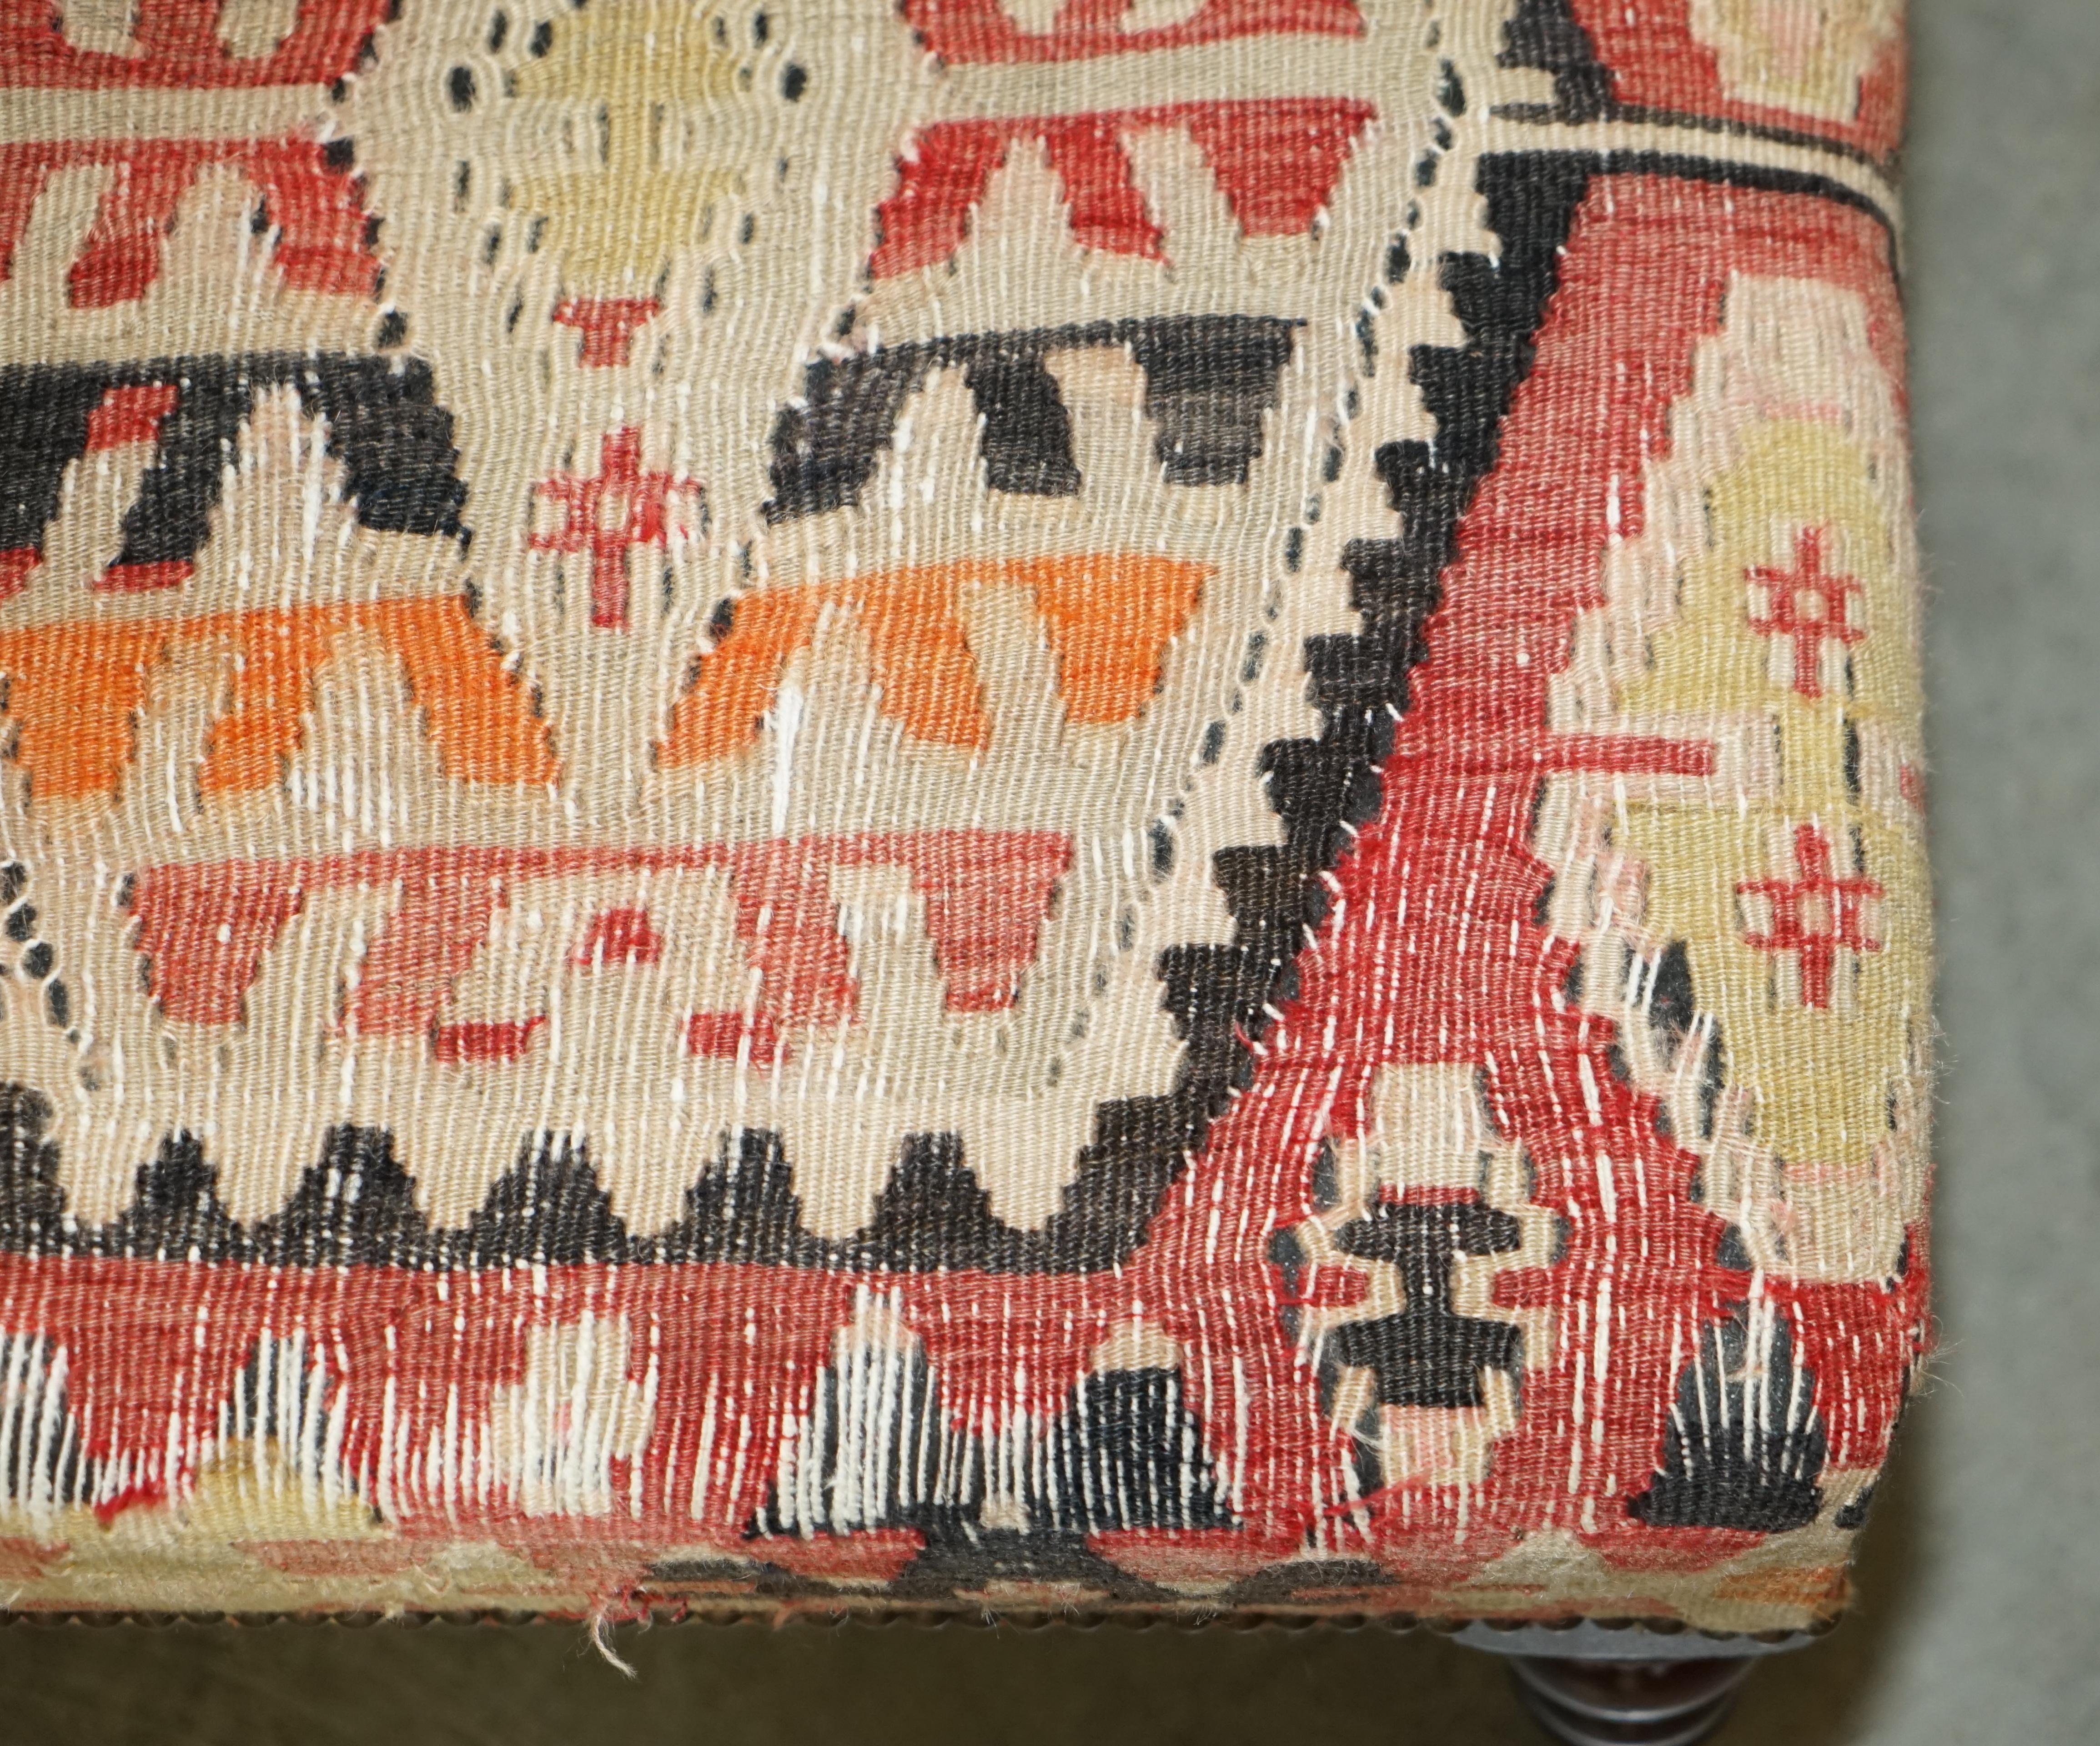 STUNNING AND COLLECTABLE ViNTAGE GEORGE SMITH CHELSEA KILIM FOOTSTOOL OTTOMAN 8